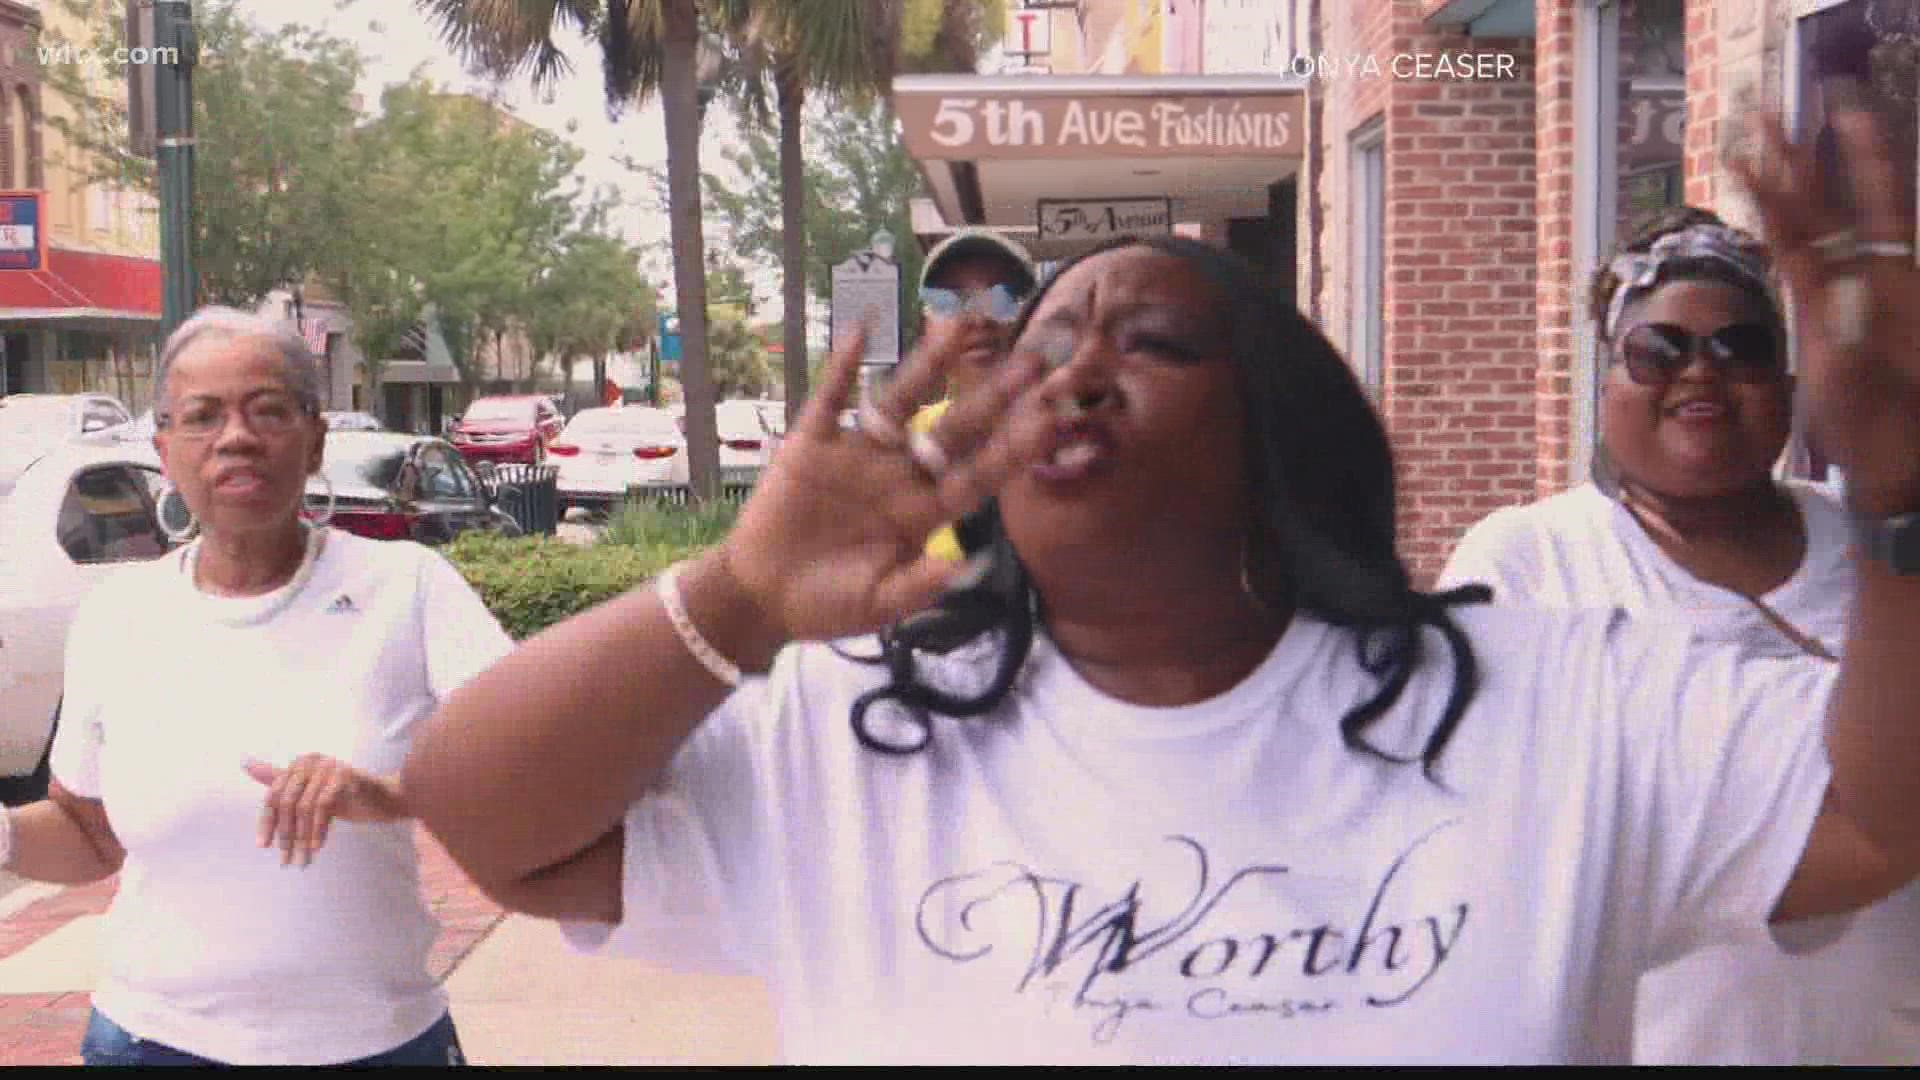 Orangeburg native Tonya Ceaser wrote and sang the song and filmed a video for it in downtown Orangeburg.